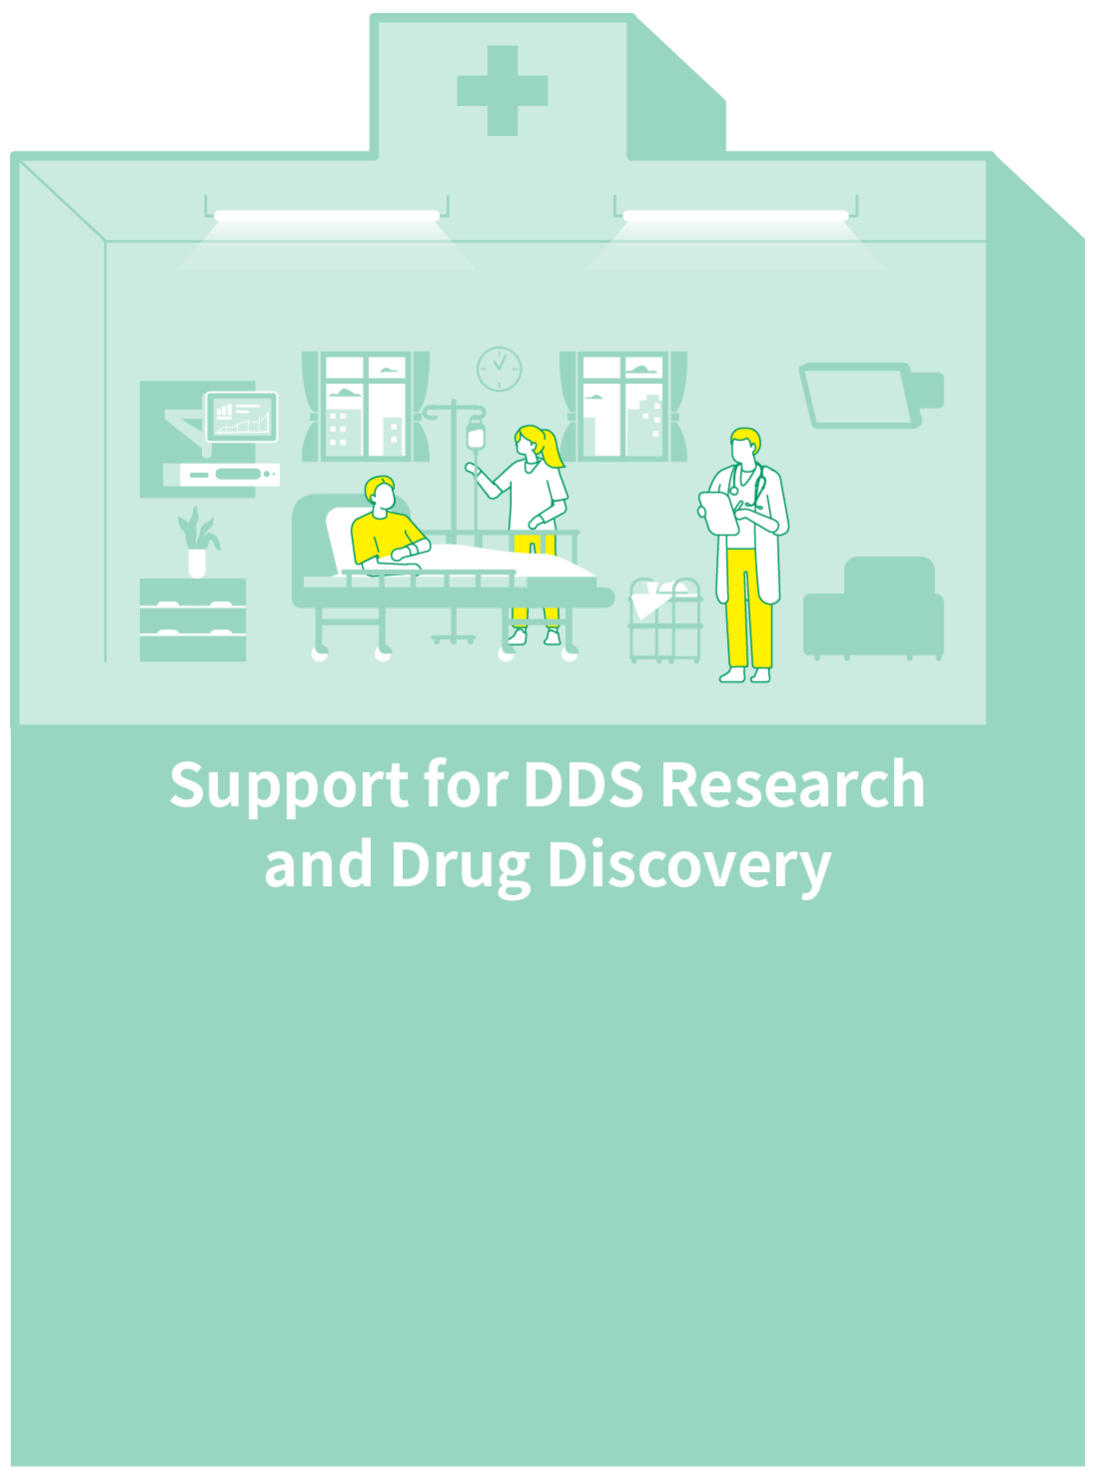 Support for DDS Research and Drug Discovery